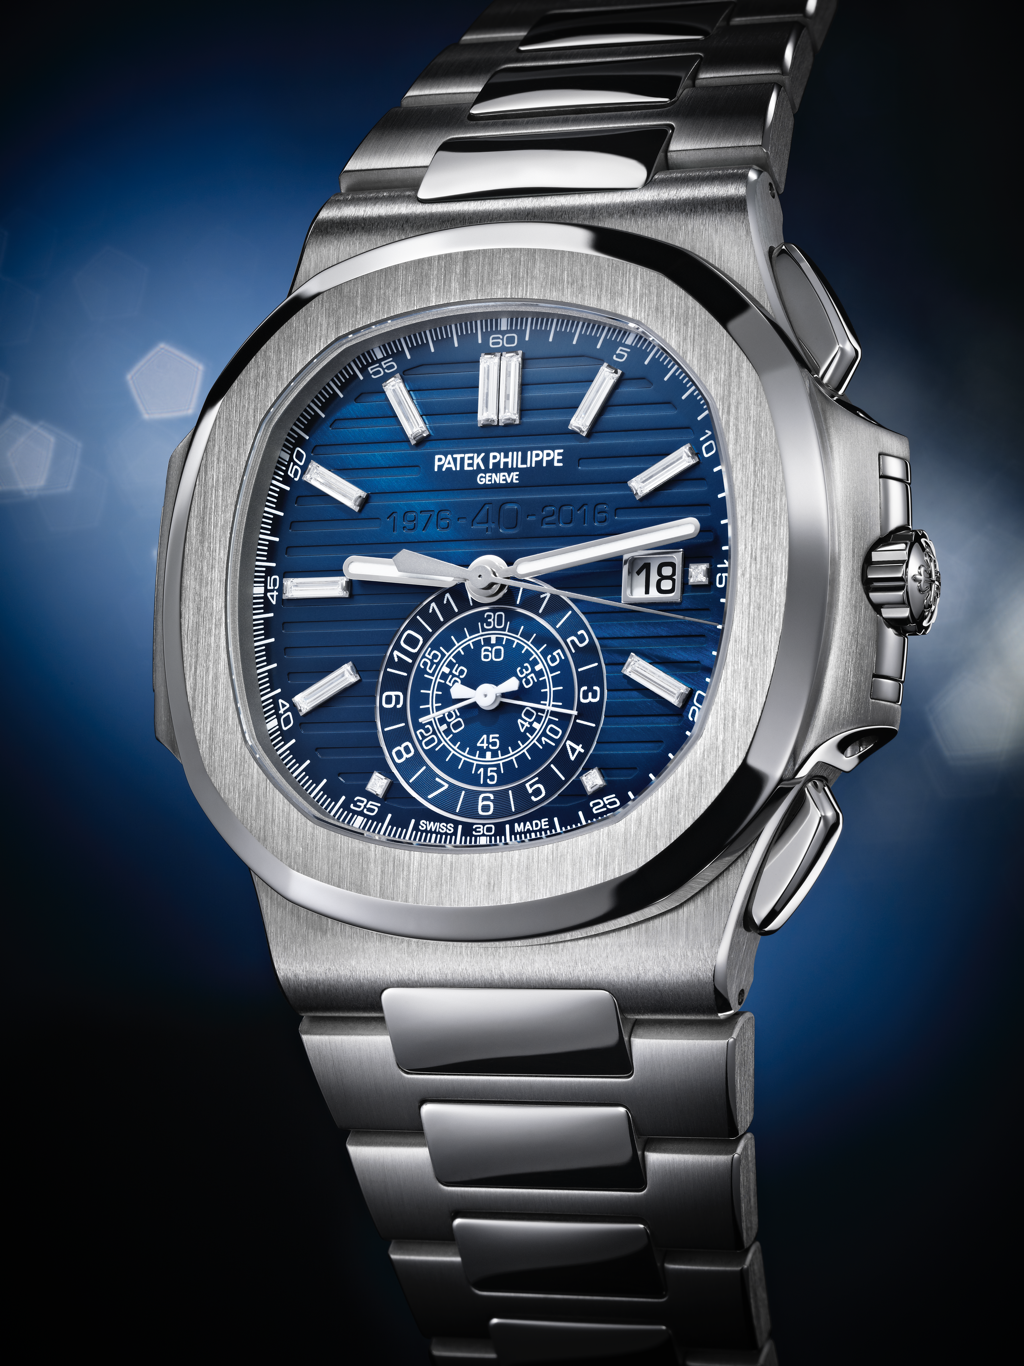 The Nautilus Chronograph Ref. 5976/1G 40th Anniversary in 18K white gold, limited to 1300 pieces.